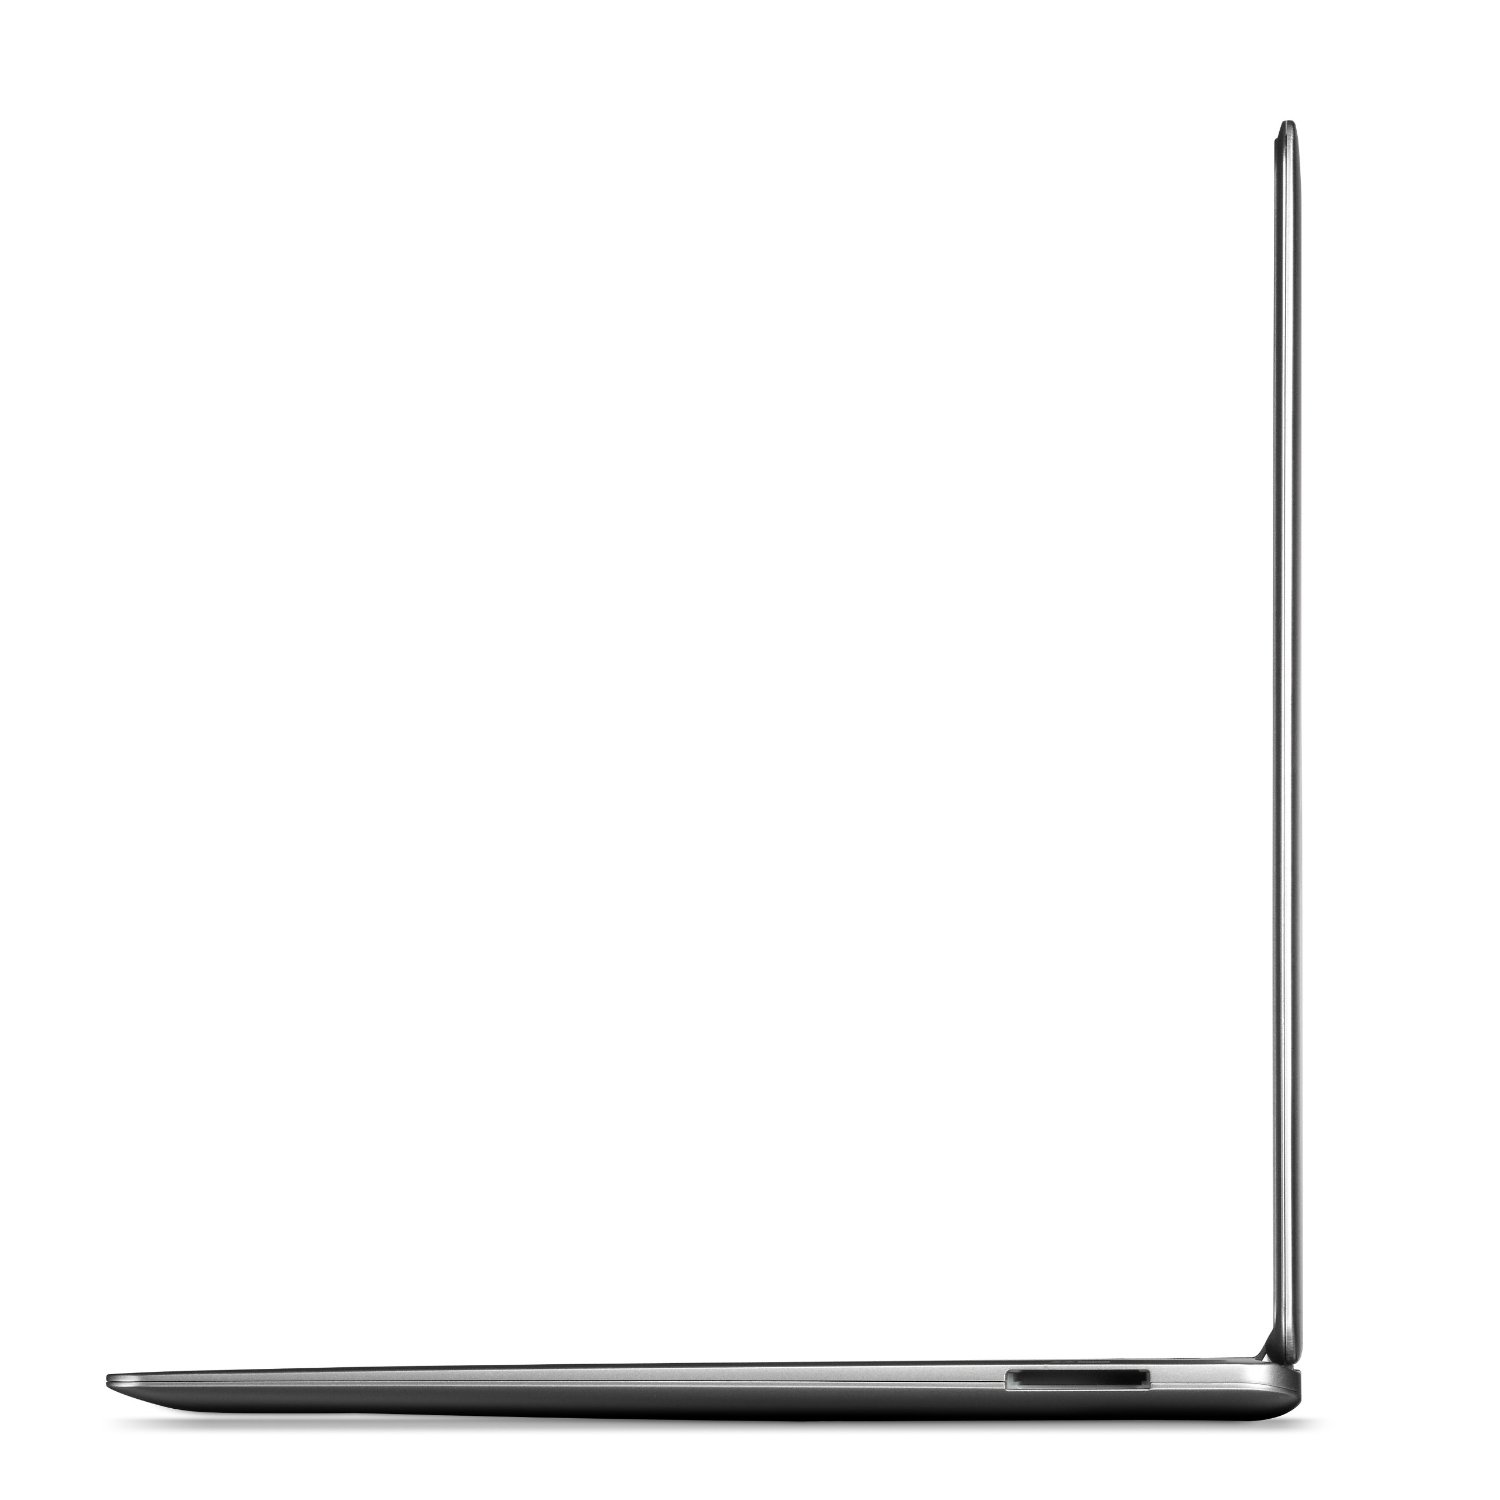 http://thetechjournal.com/wp-content/uploads/images/1111/1322192769-acer-aspire-s39516828-133inch-hd-display-ultrabook-8.jpg